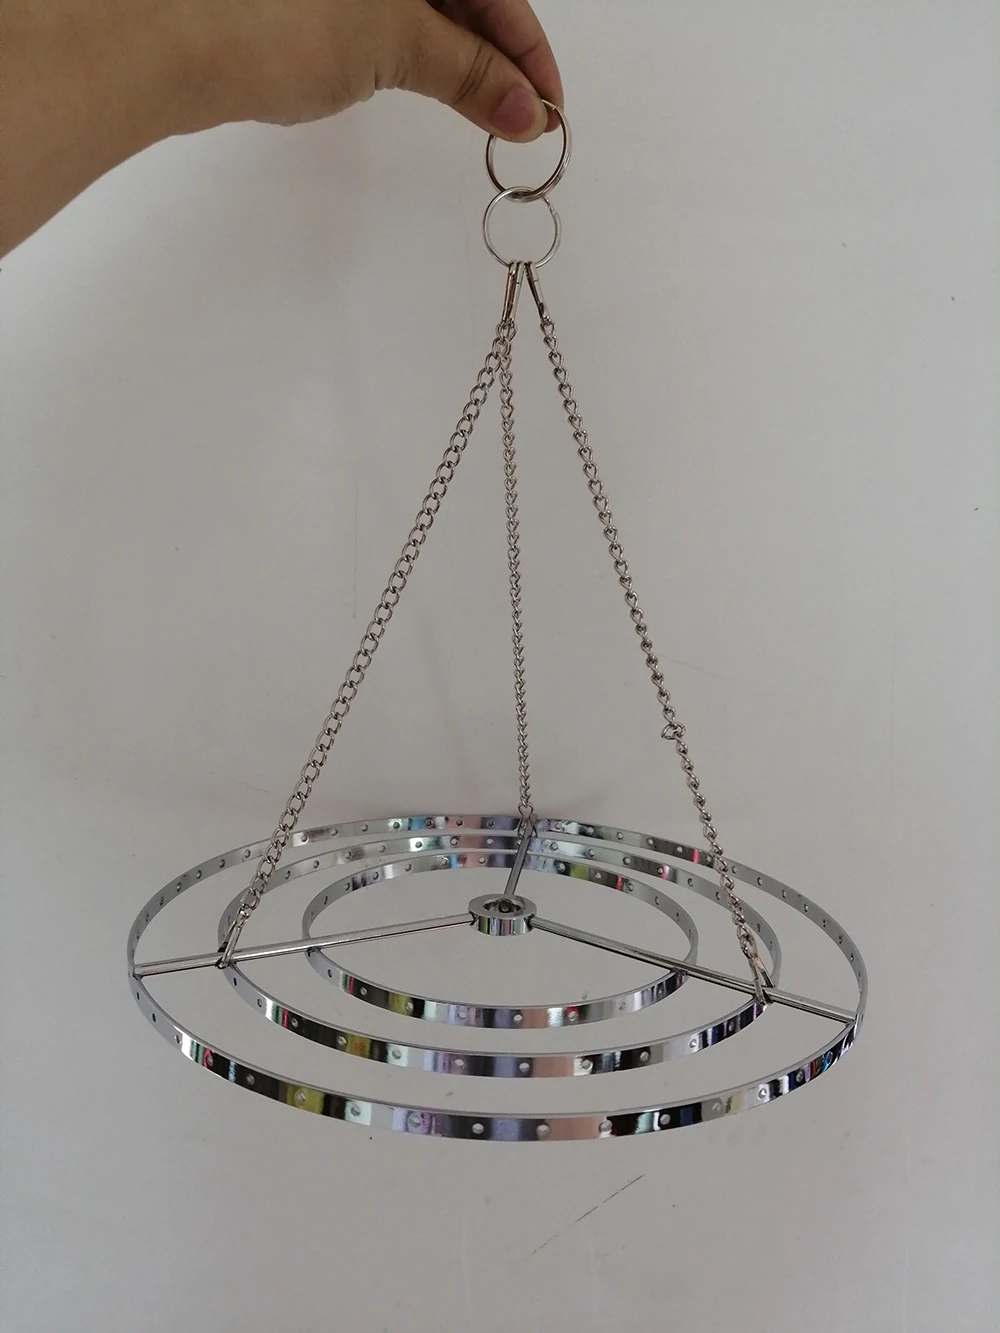 1Pcs Round Hanger Centerpiece Hanging Frame Chandelier Wedding Christmas Party 